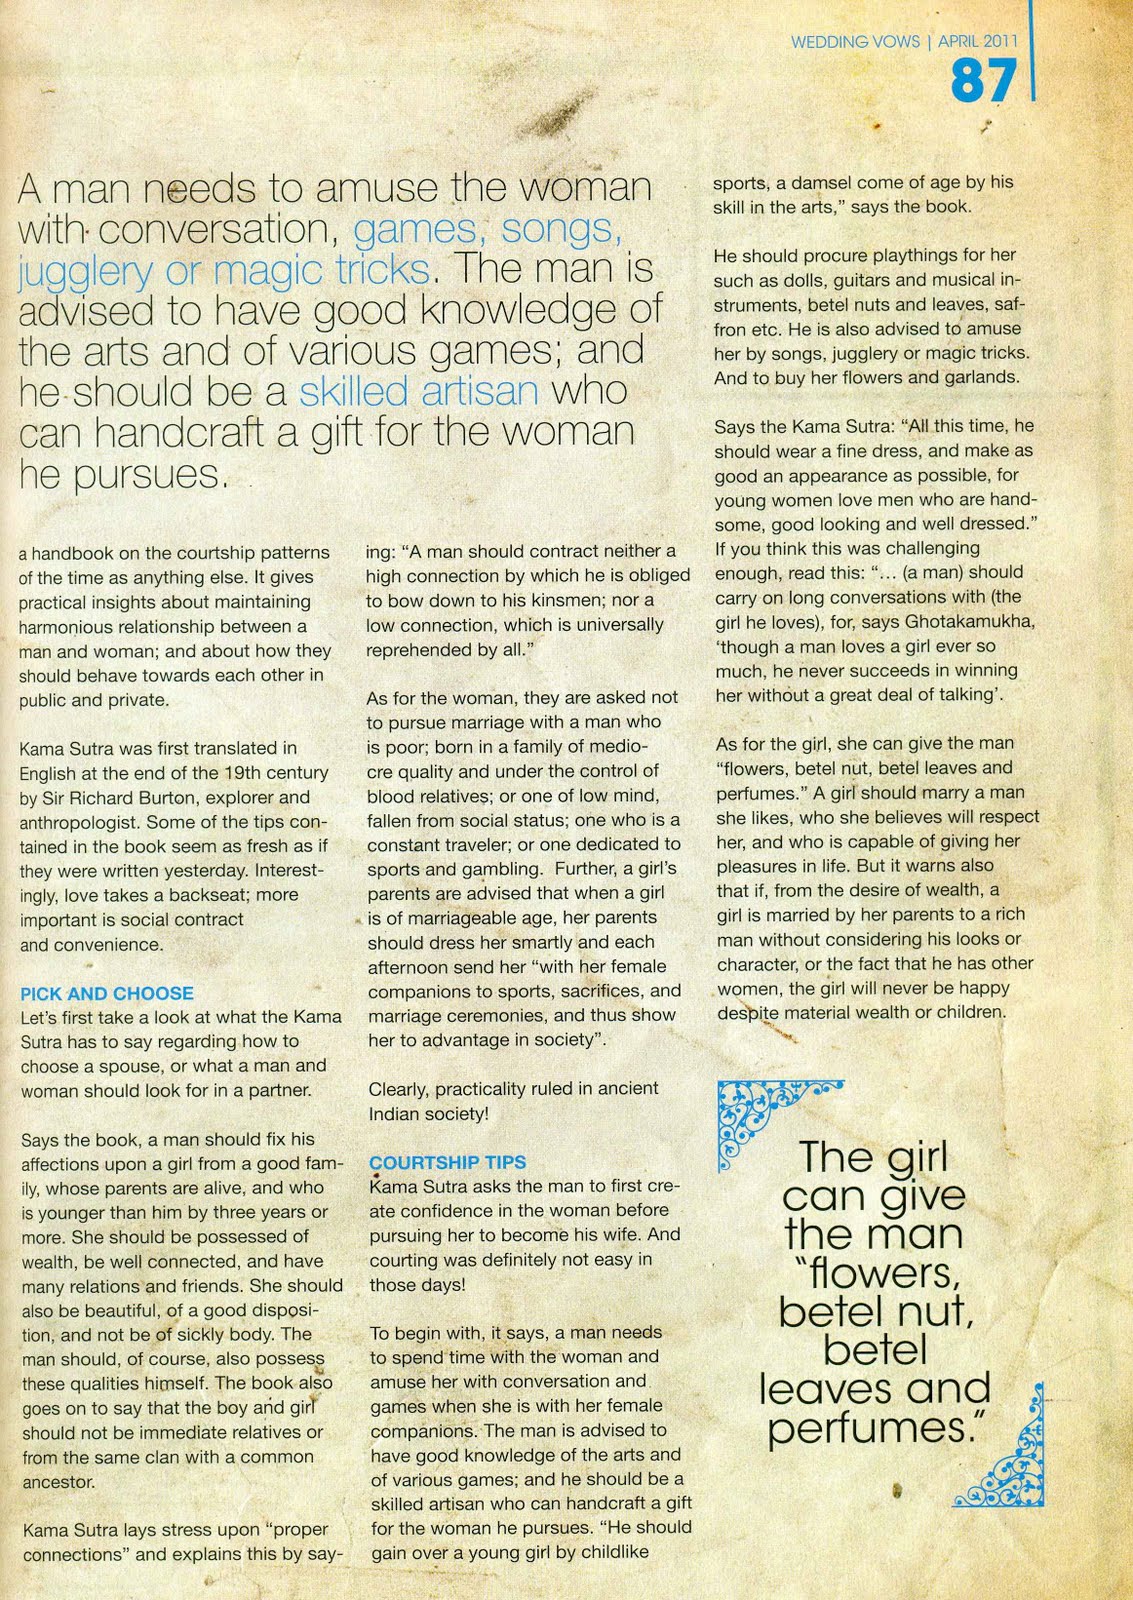 Indian Culture And Society More Then Sex From Wedding Vows Magazine Issue 2 April 2011